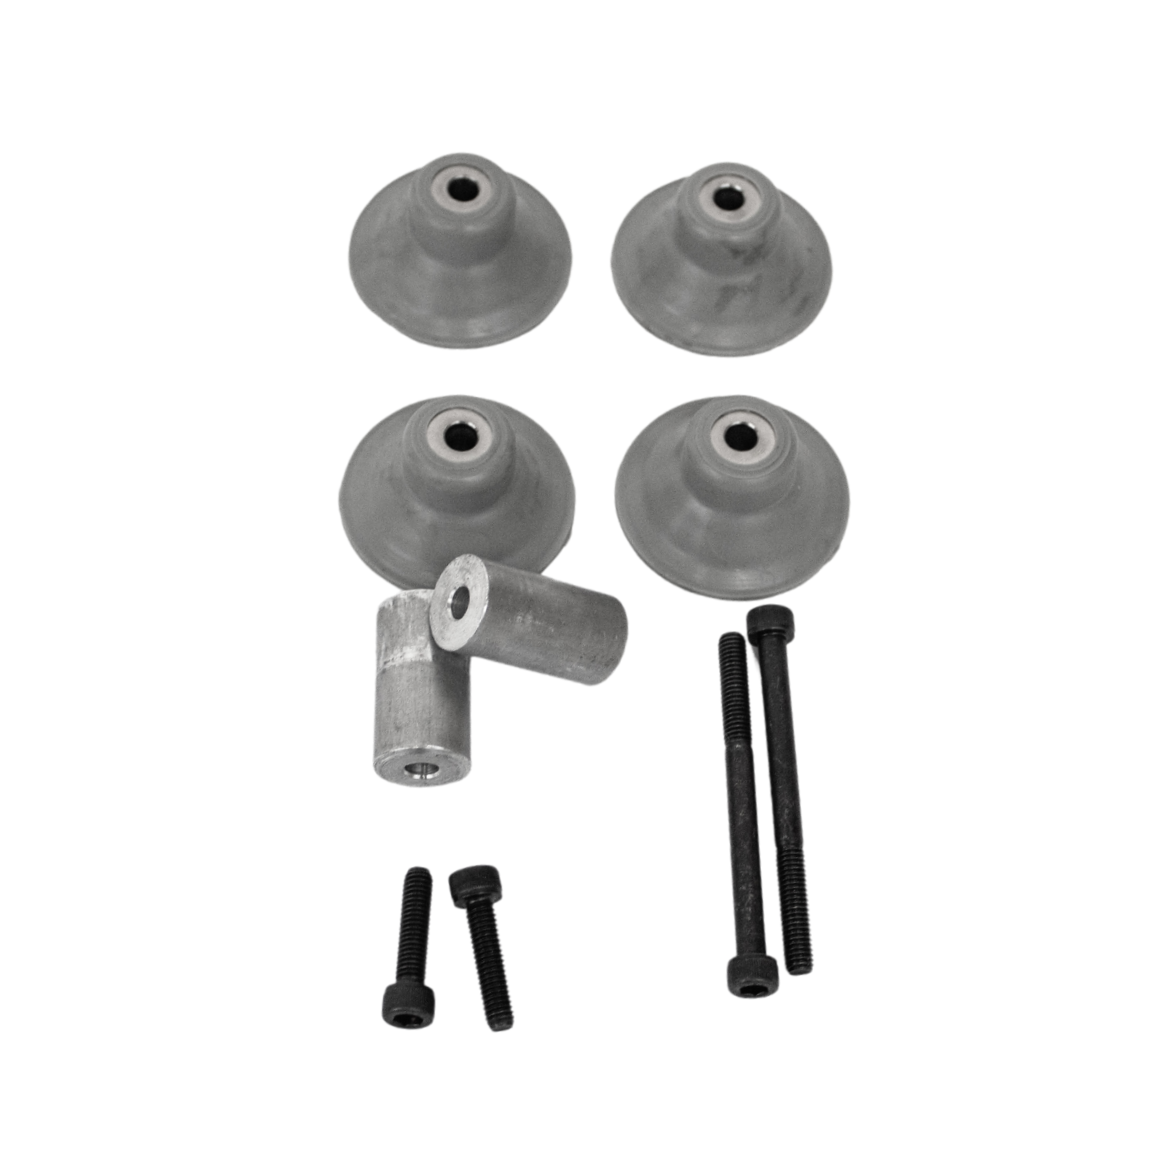 Standard Low Rubber Foot Kit Fitting Bizerba Slicers GSP, GSPH Replaces 60378024100 top view